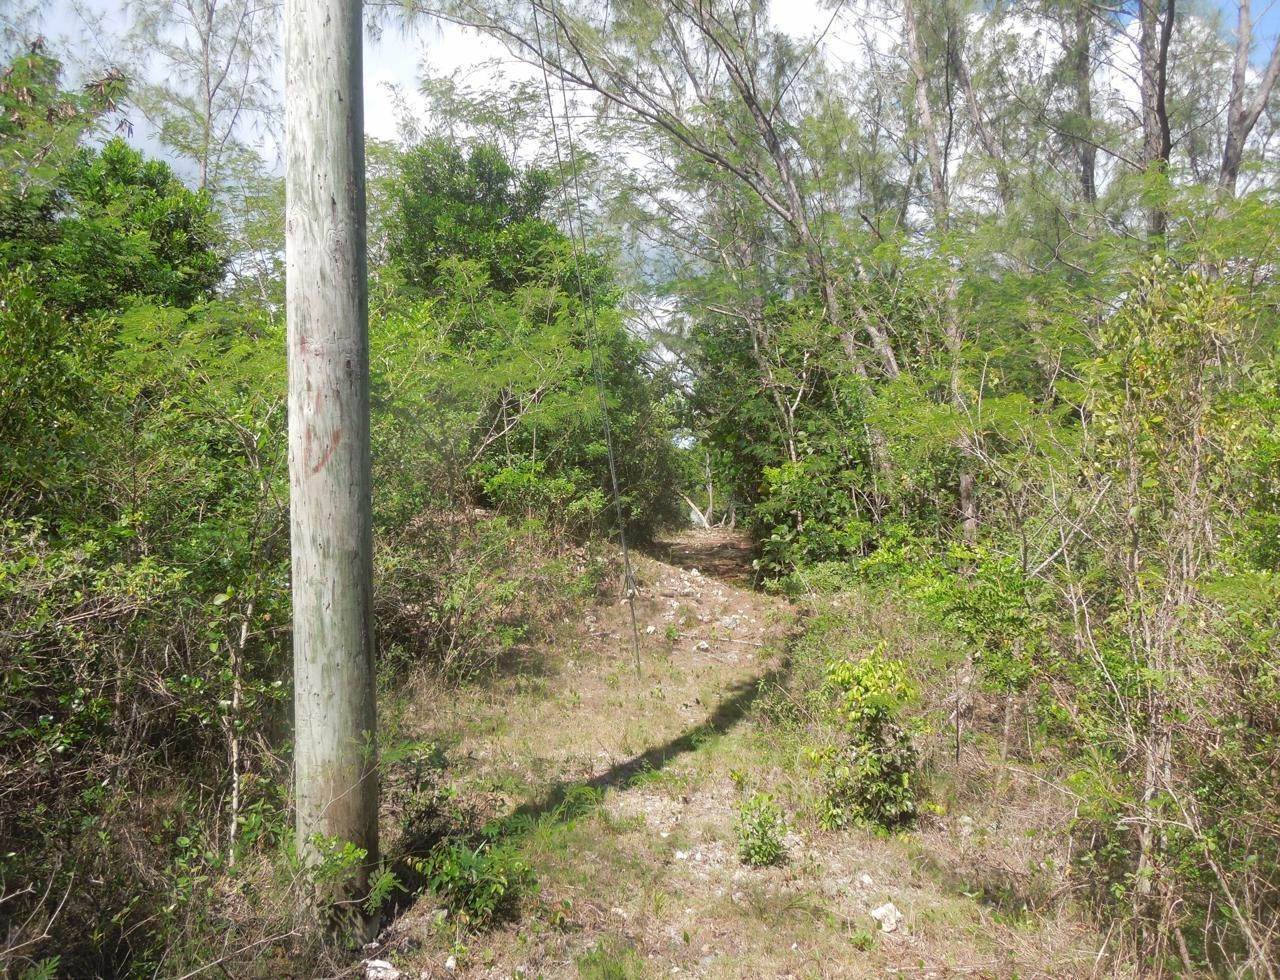 11. Lots / Acreage for Sale at Whale Point, Eleuthera, Bahamas